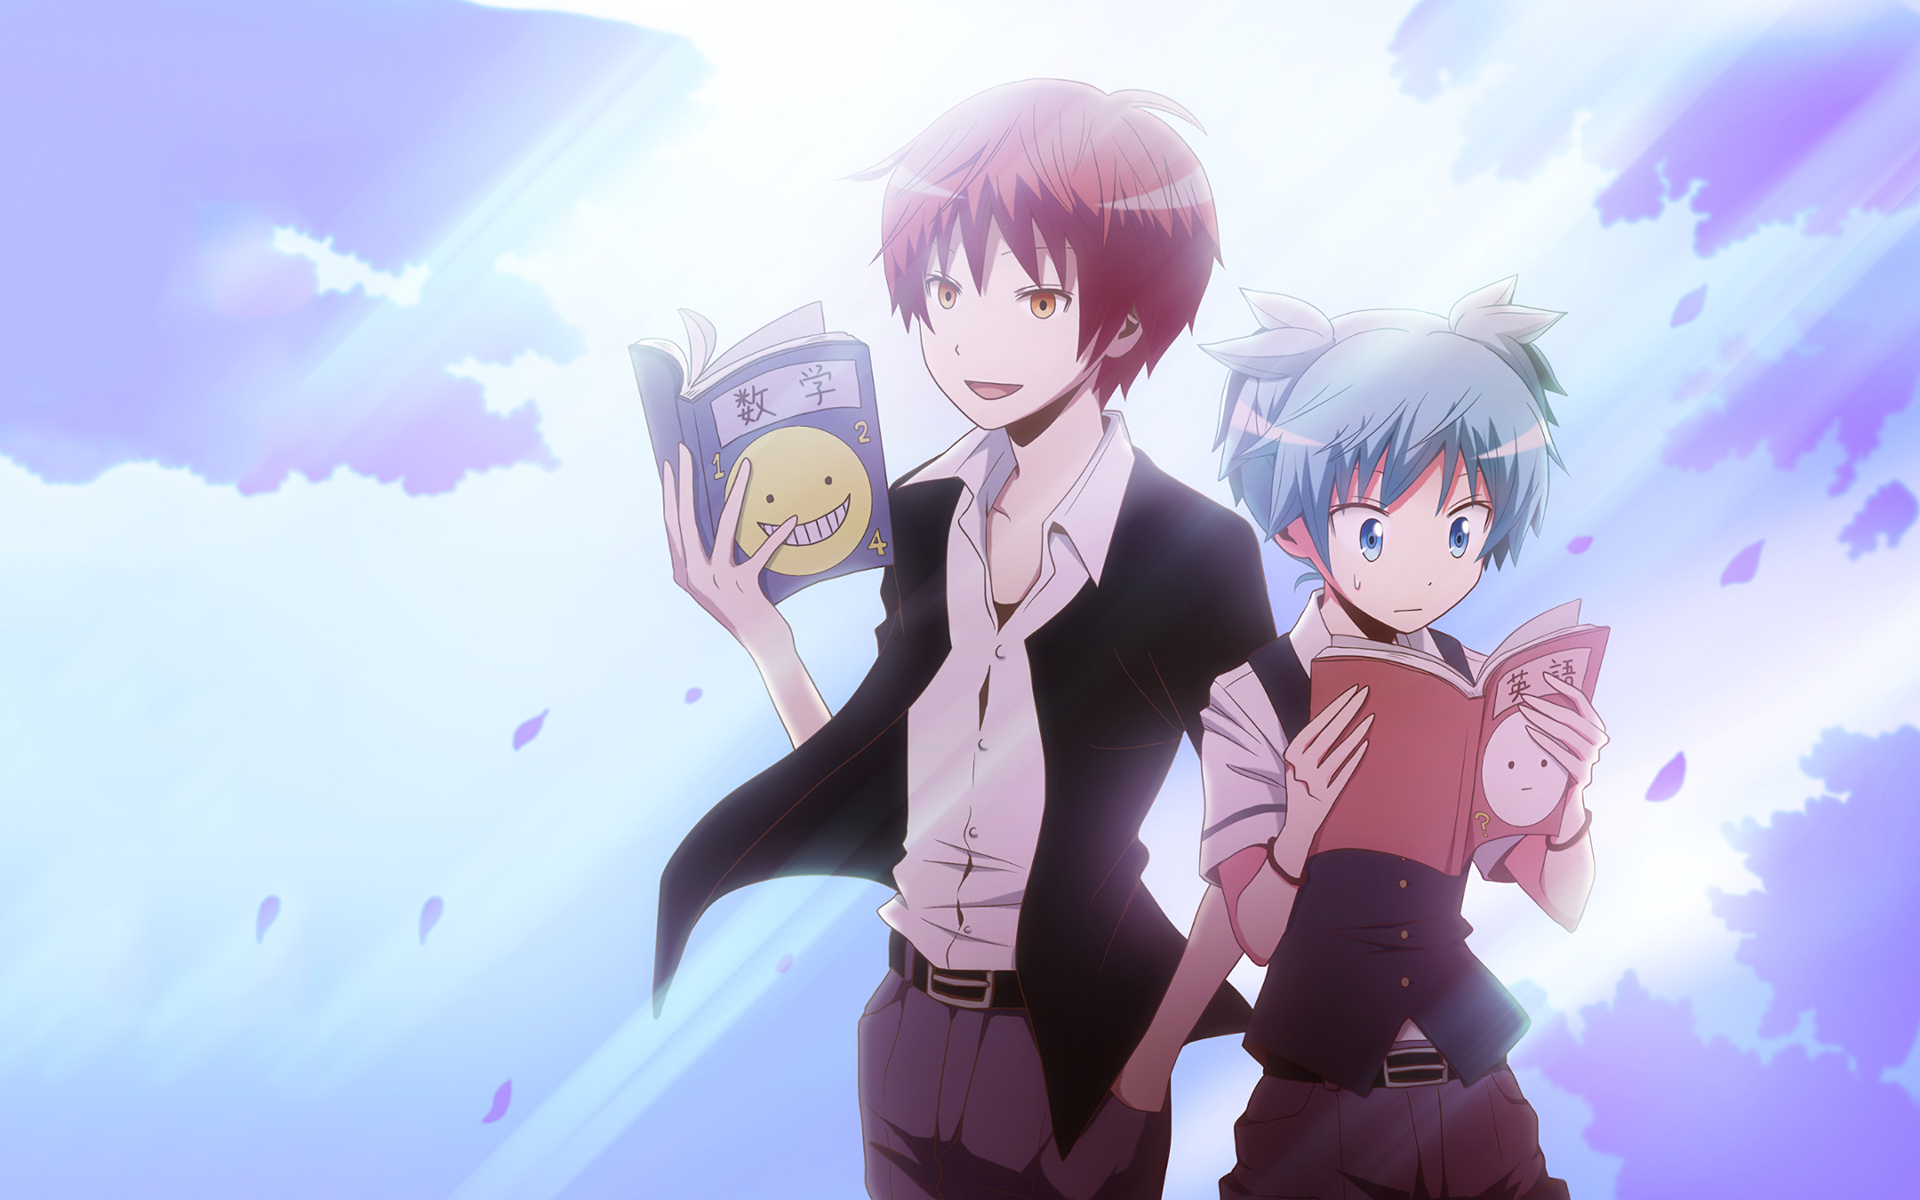 Anime Assassination Classroom HD Wallpaper by 575 (pixiv)